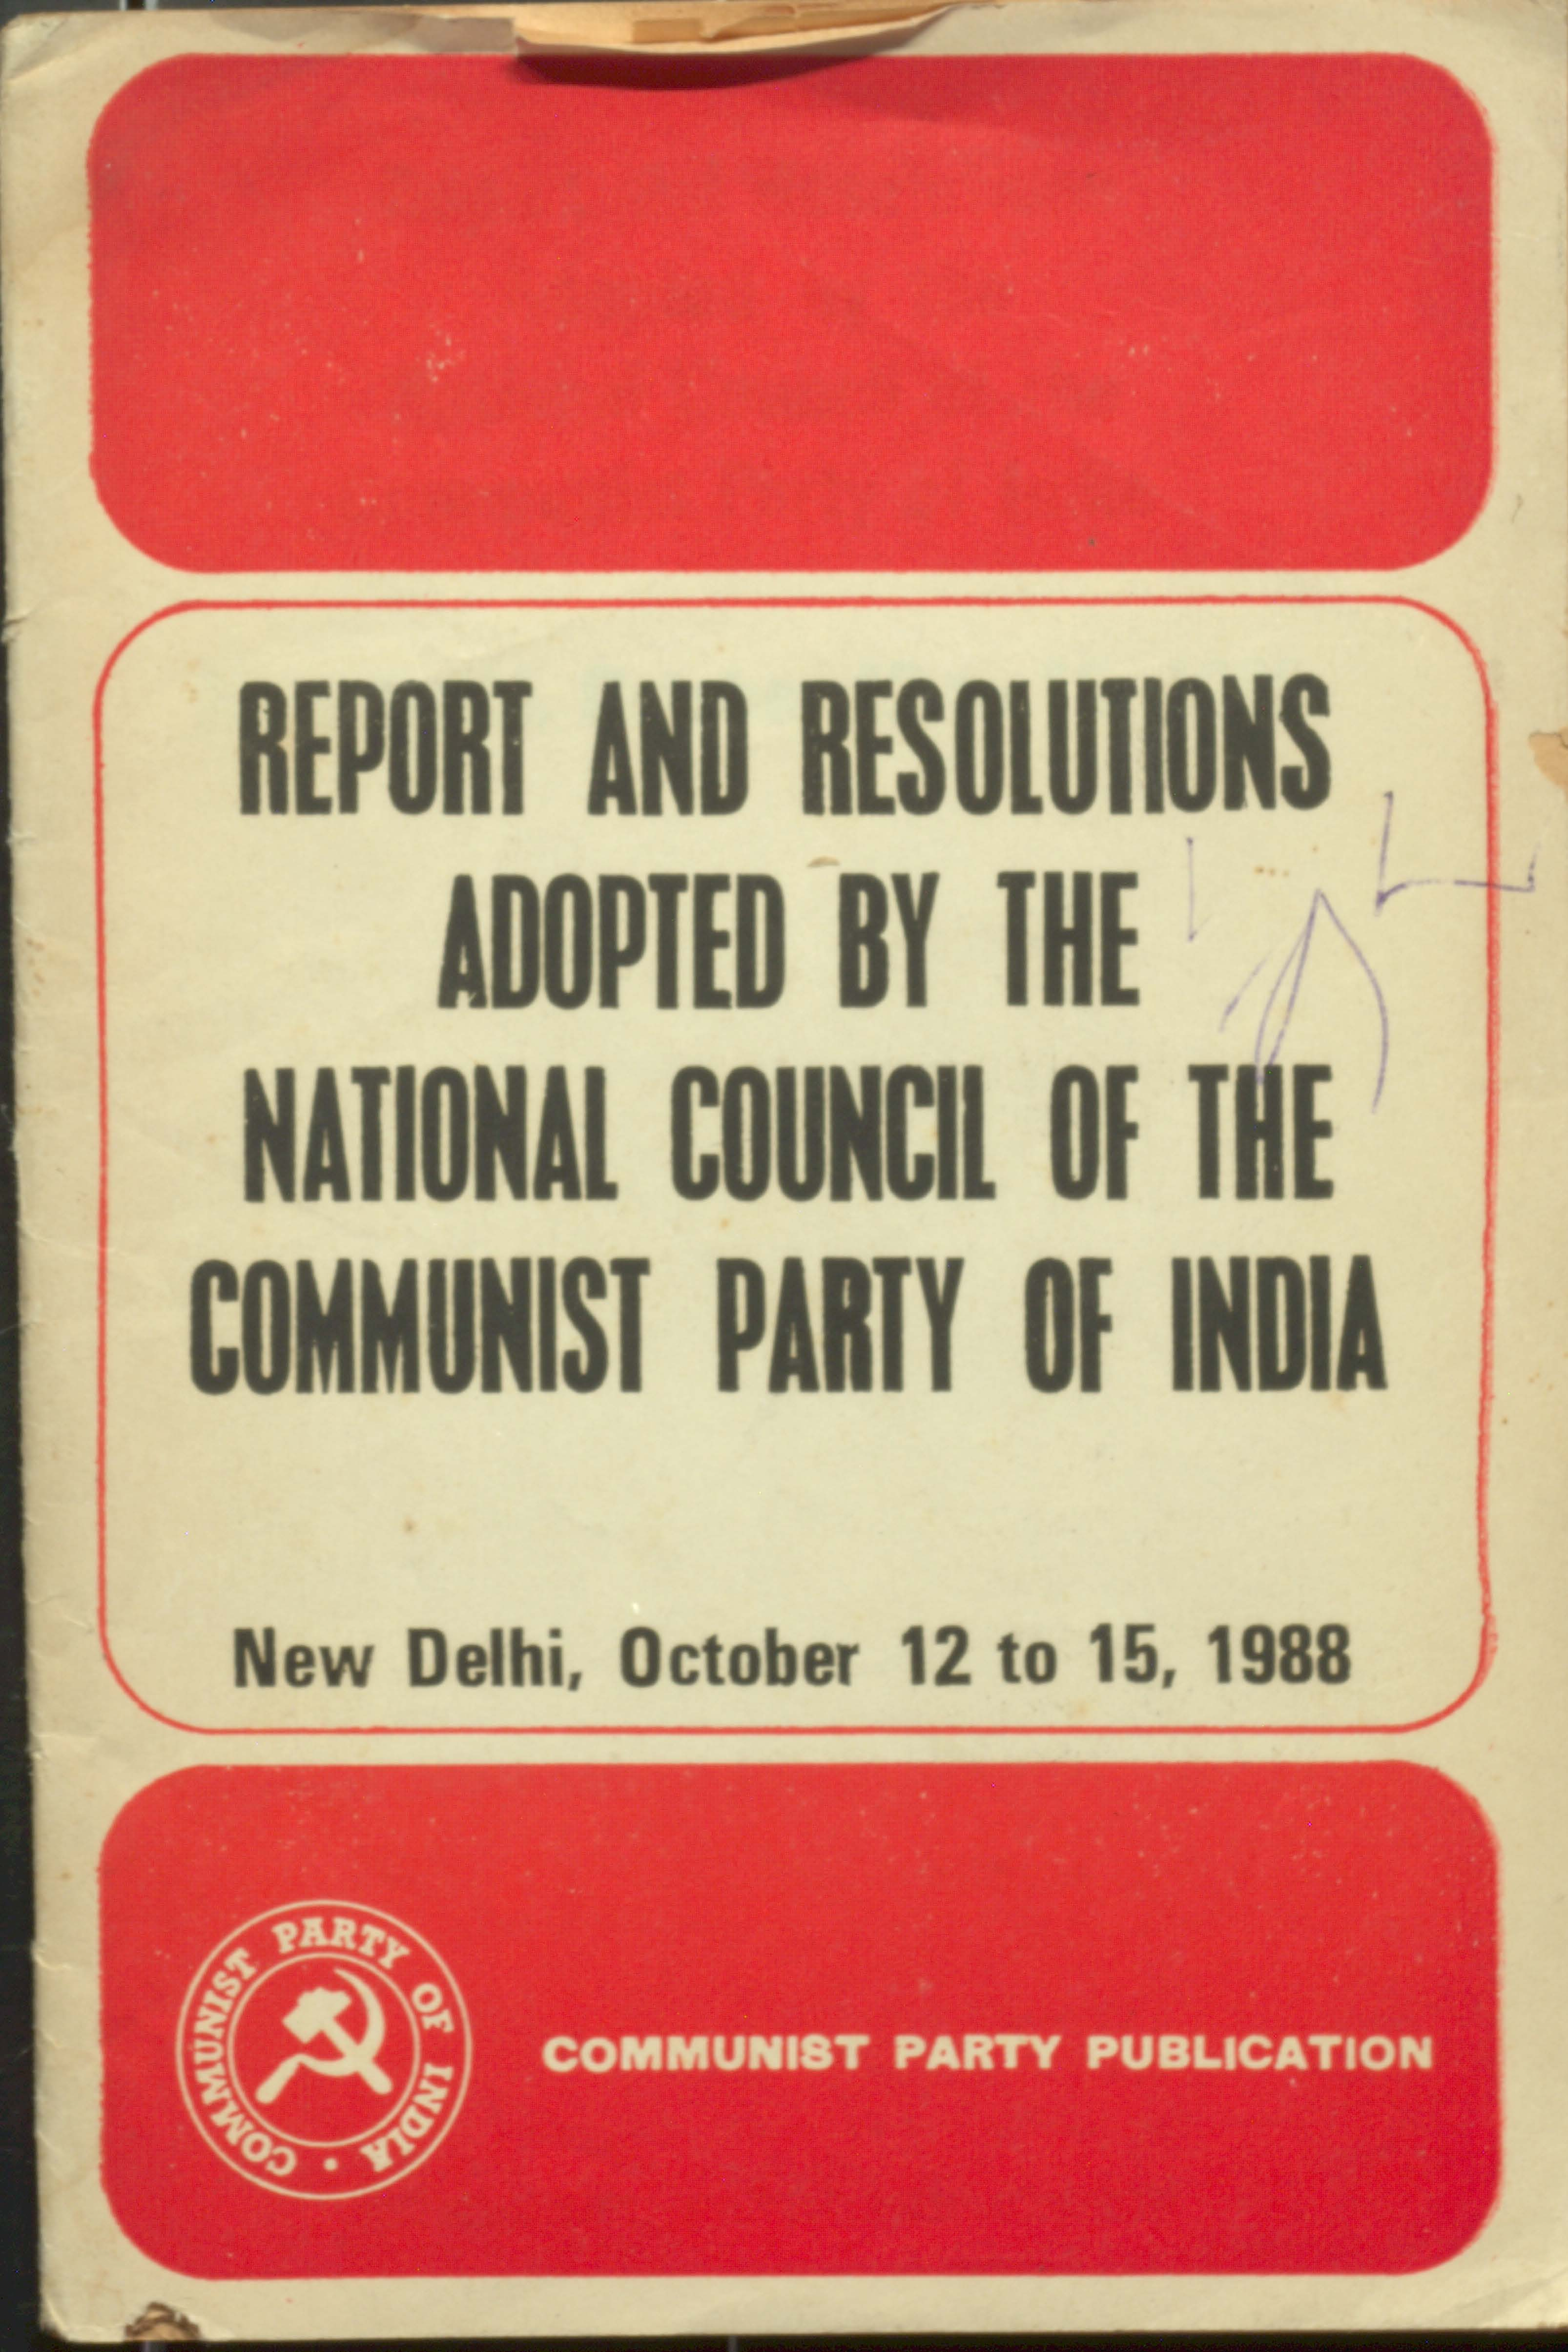 Reports and Resolutions of the National Counil of the Communist party of Indi